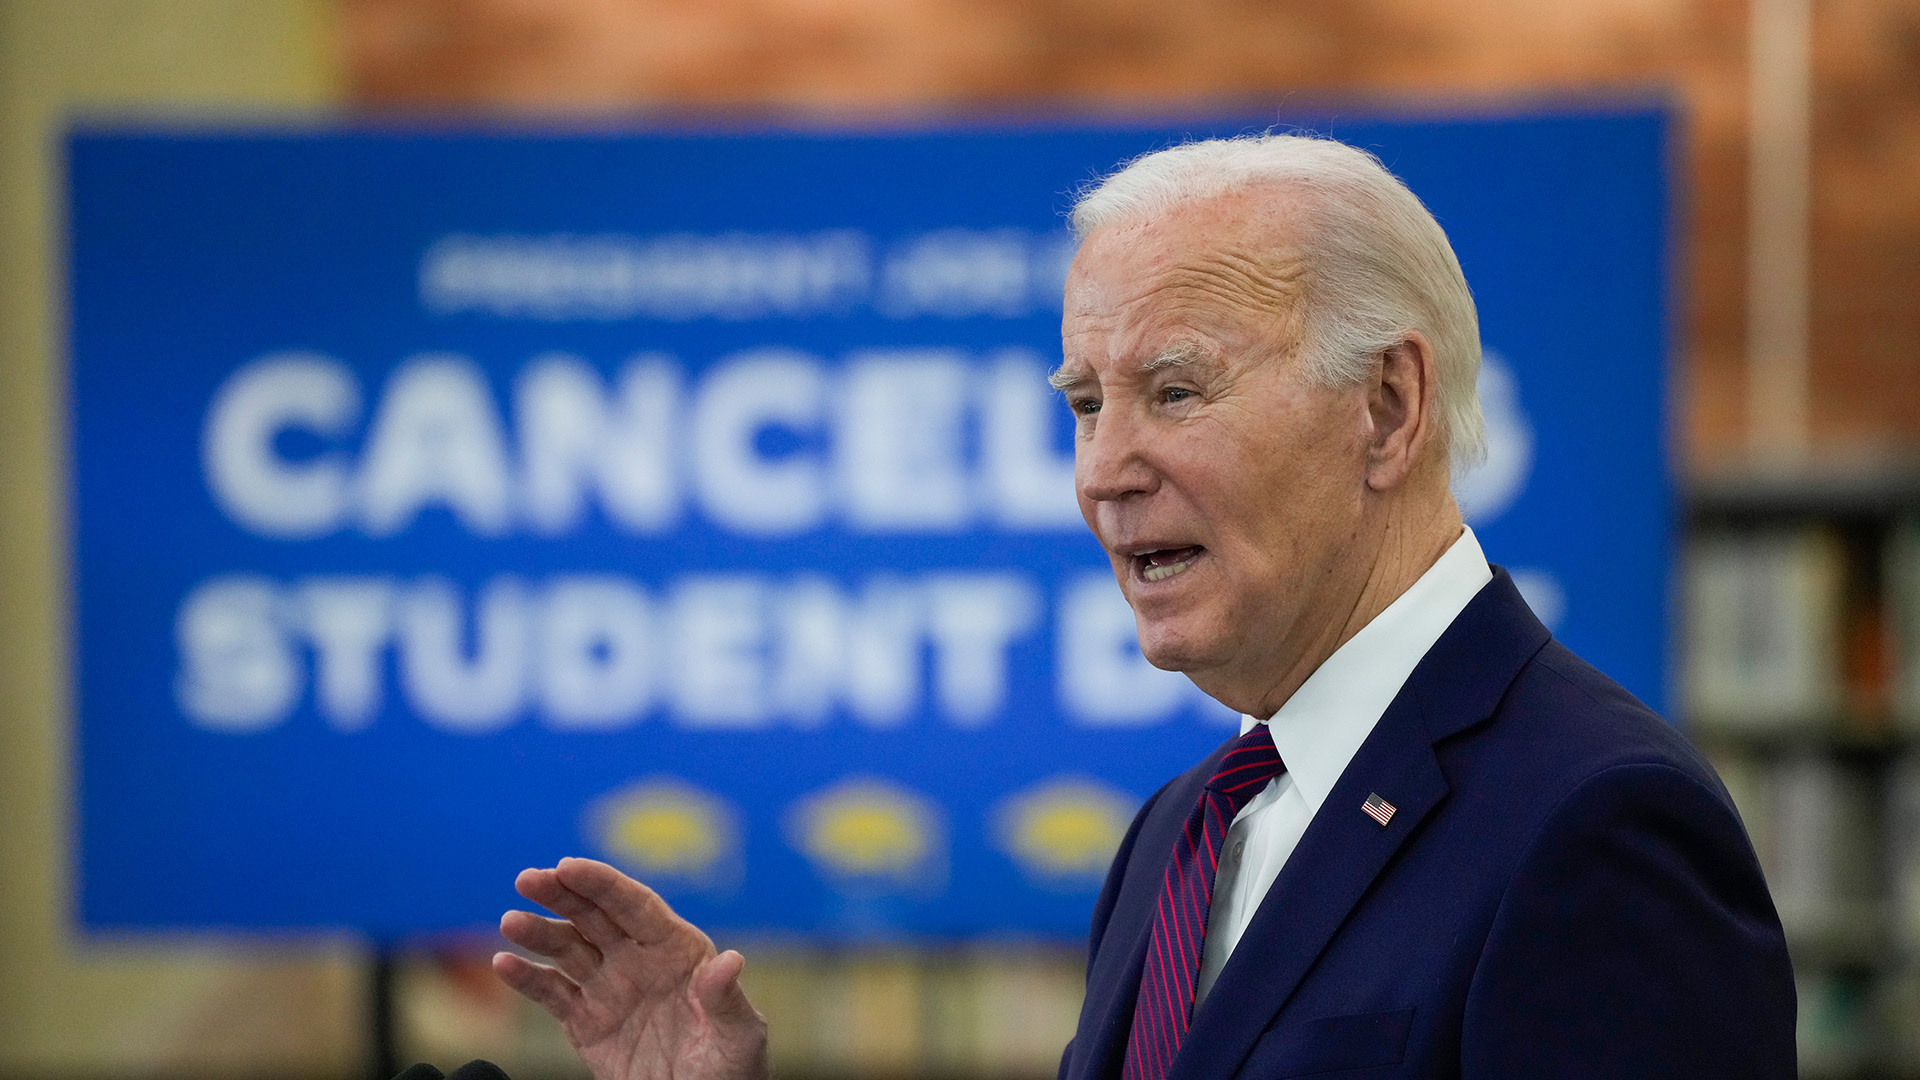 The Biden administration unveiled plans to cancel .1 billion in student loan debt, targeting individuals who attended the Art Institutes.